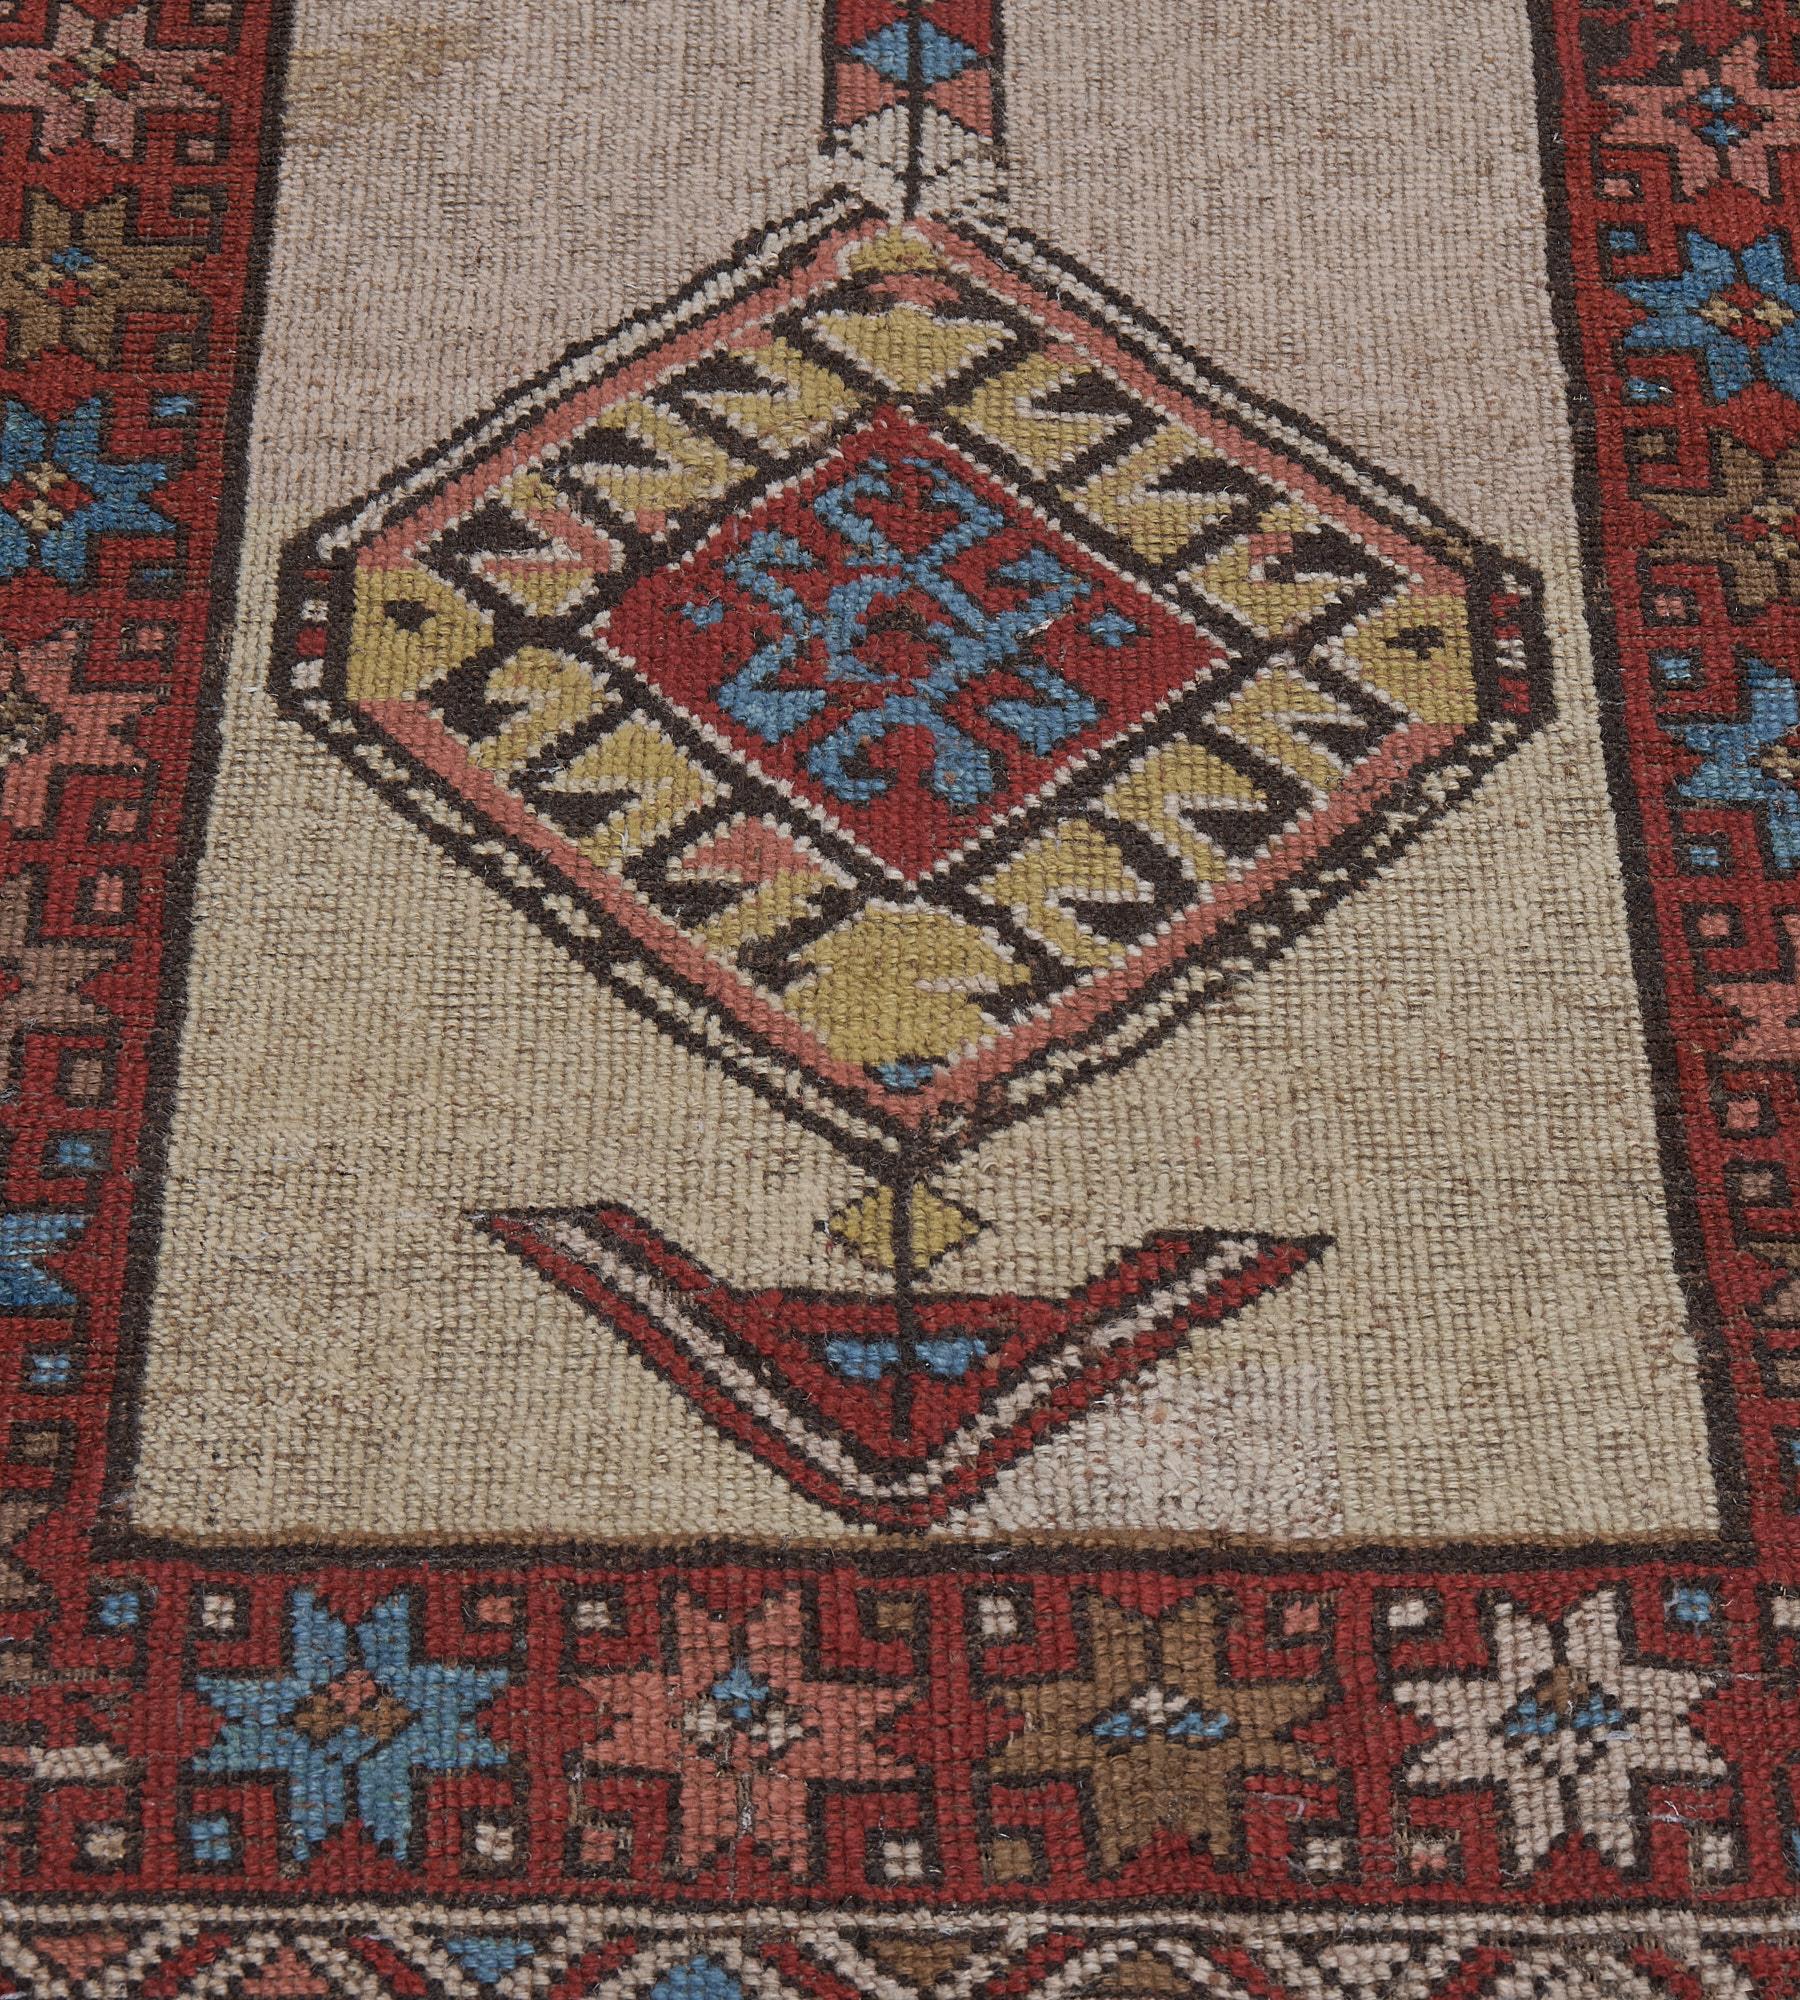 This antique, circa 1900, Serab rug has a shaded ivory and camel-brown field with a bold central lozenge medallion with a large central brick-red lozenge containing a shaded blue hooked vine surrounded by a golden-yellow band of chocolate-brown